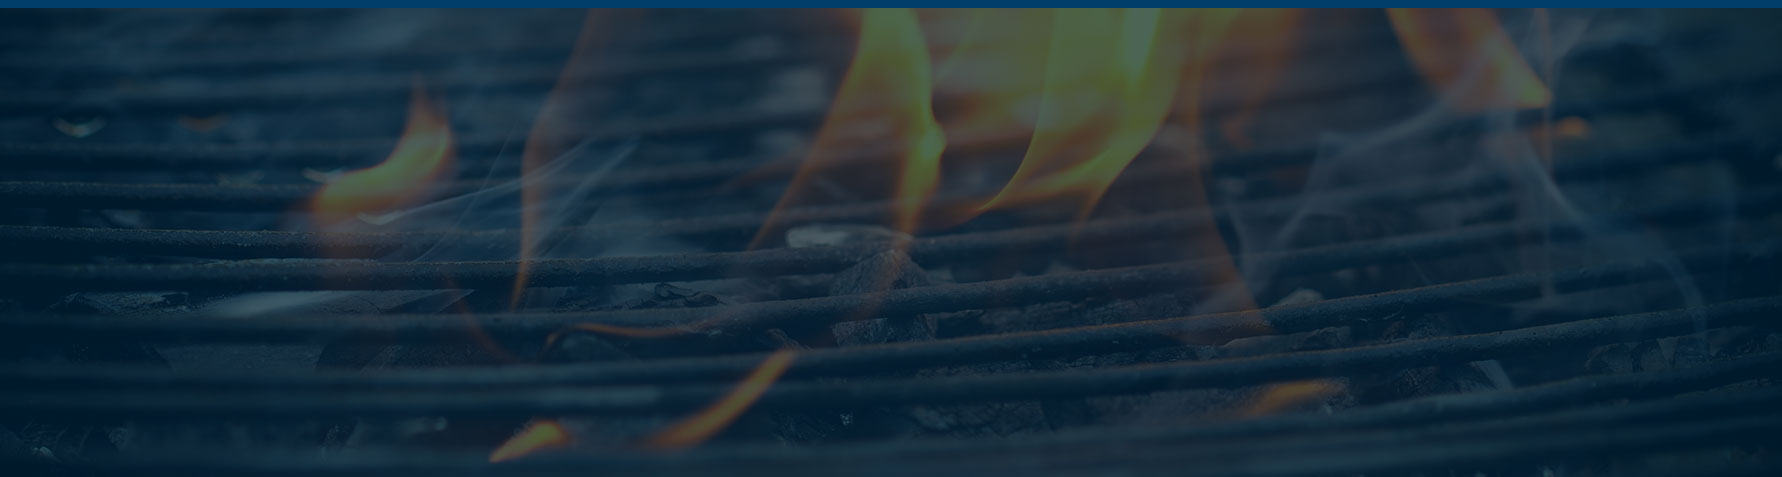 Grill Product Landing Page CTA